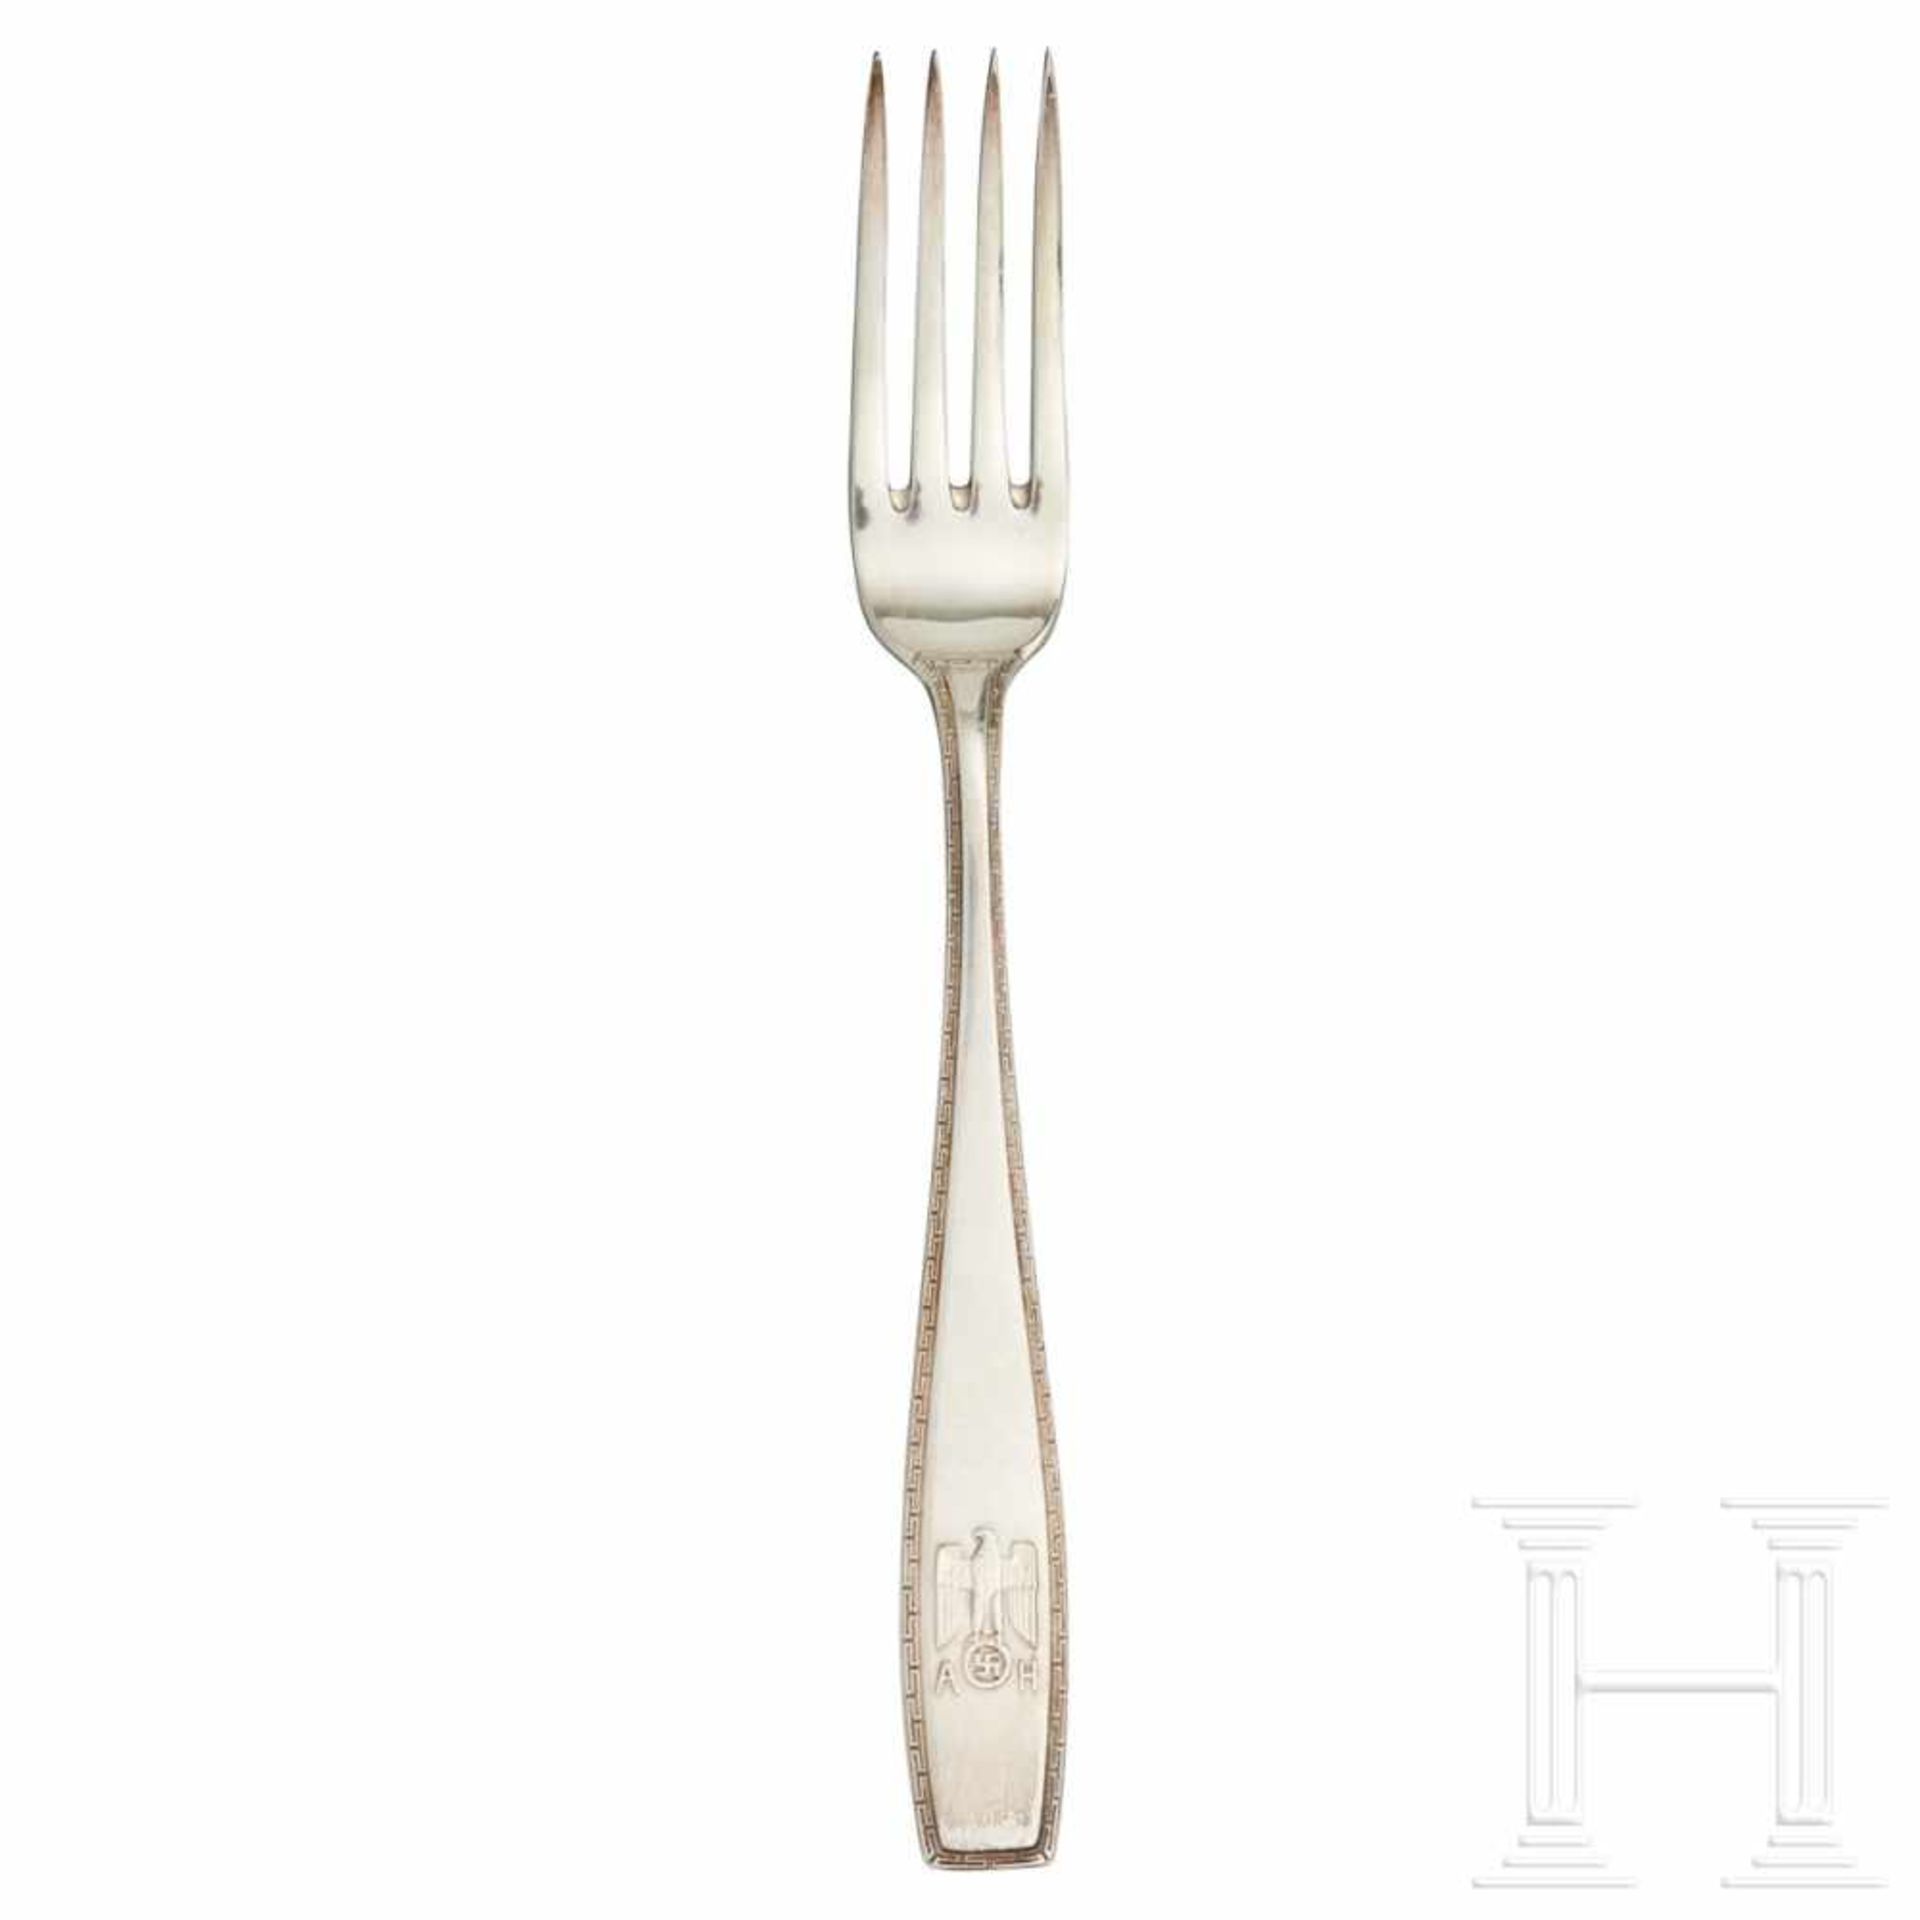 Adolf Hitler – a Lunch Fork from his Personal Silver ServiceSo called “formal pattern” with raised